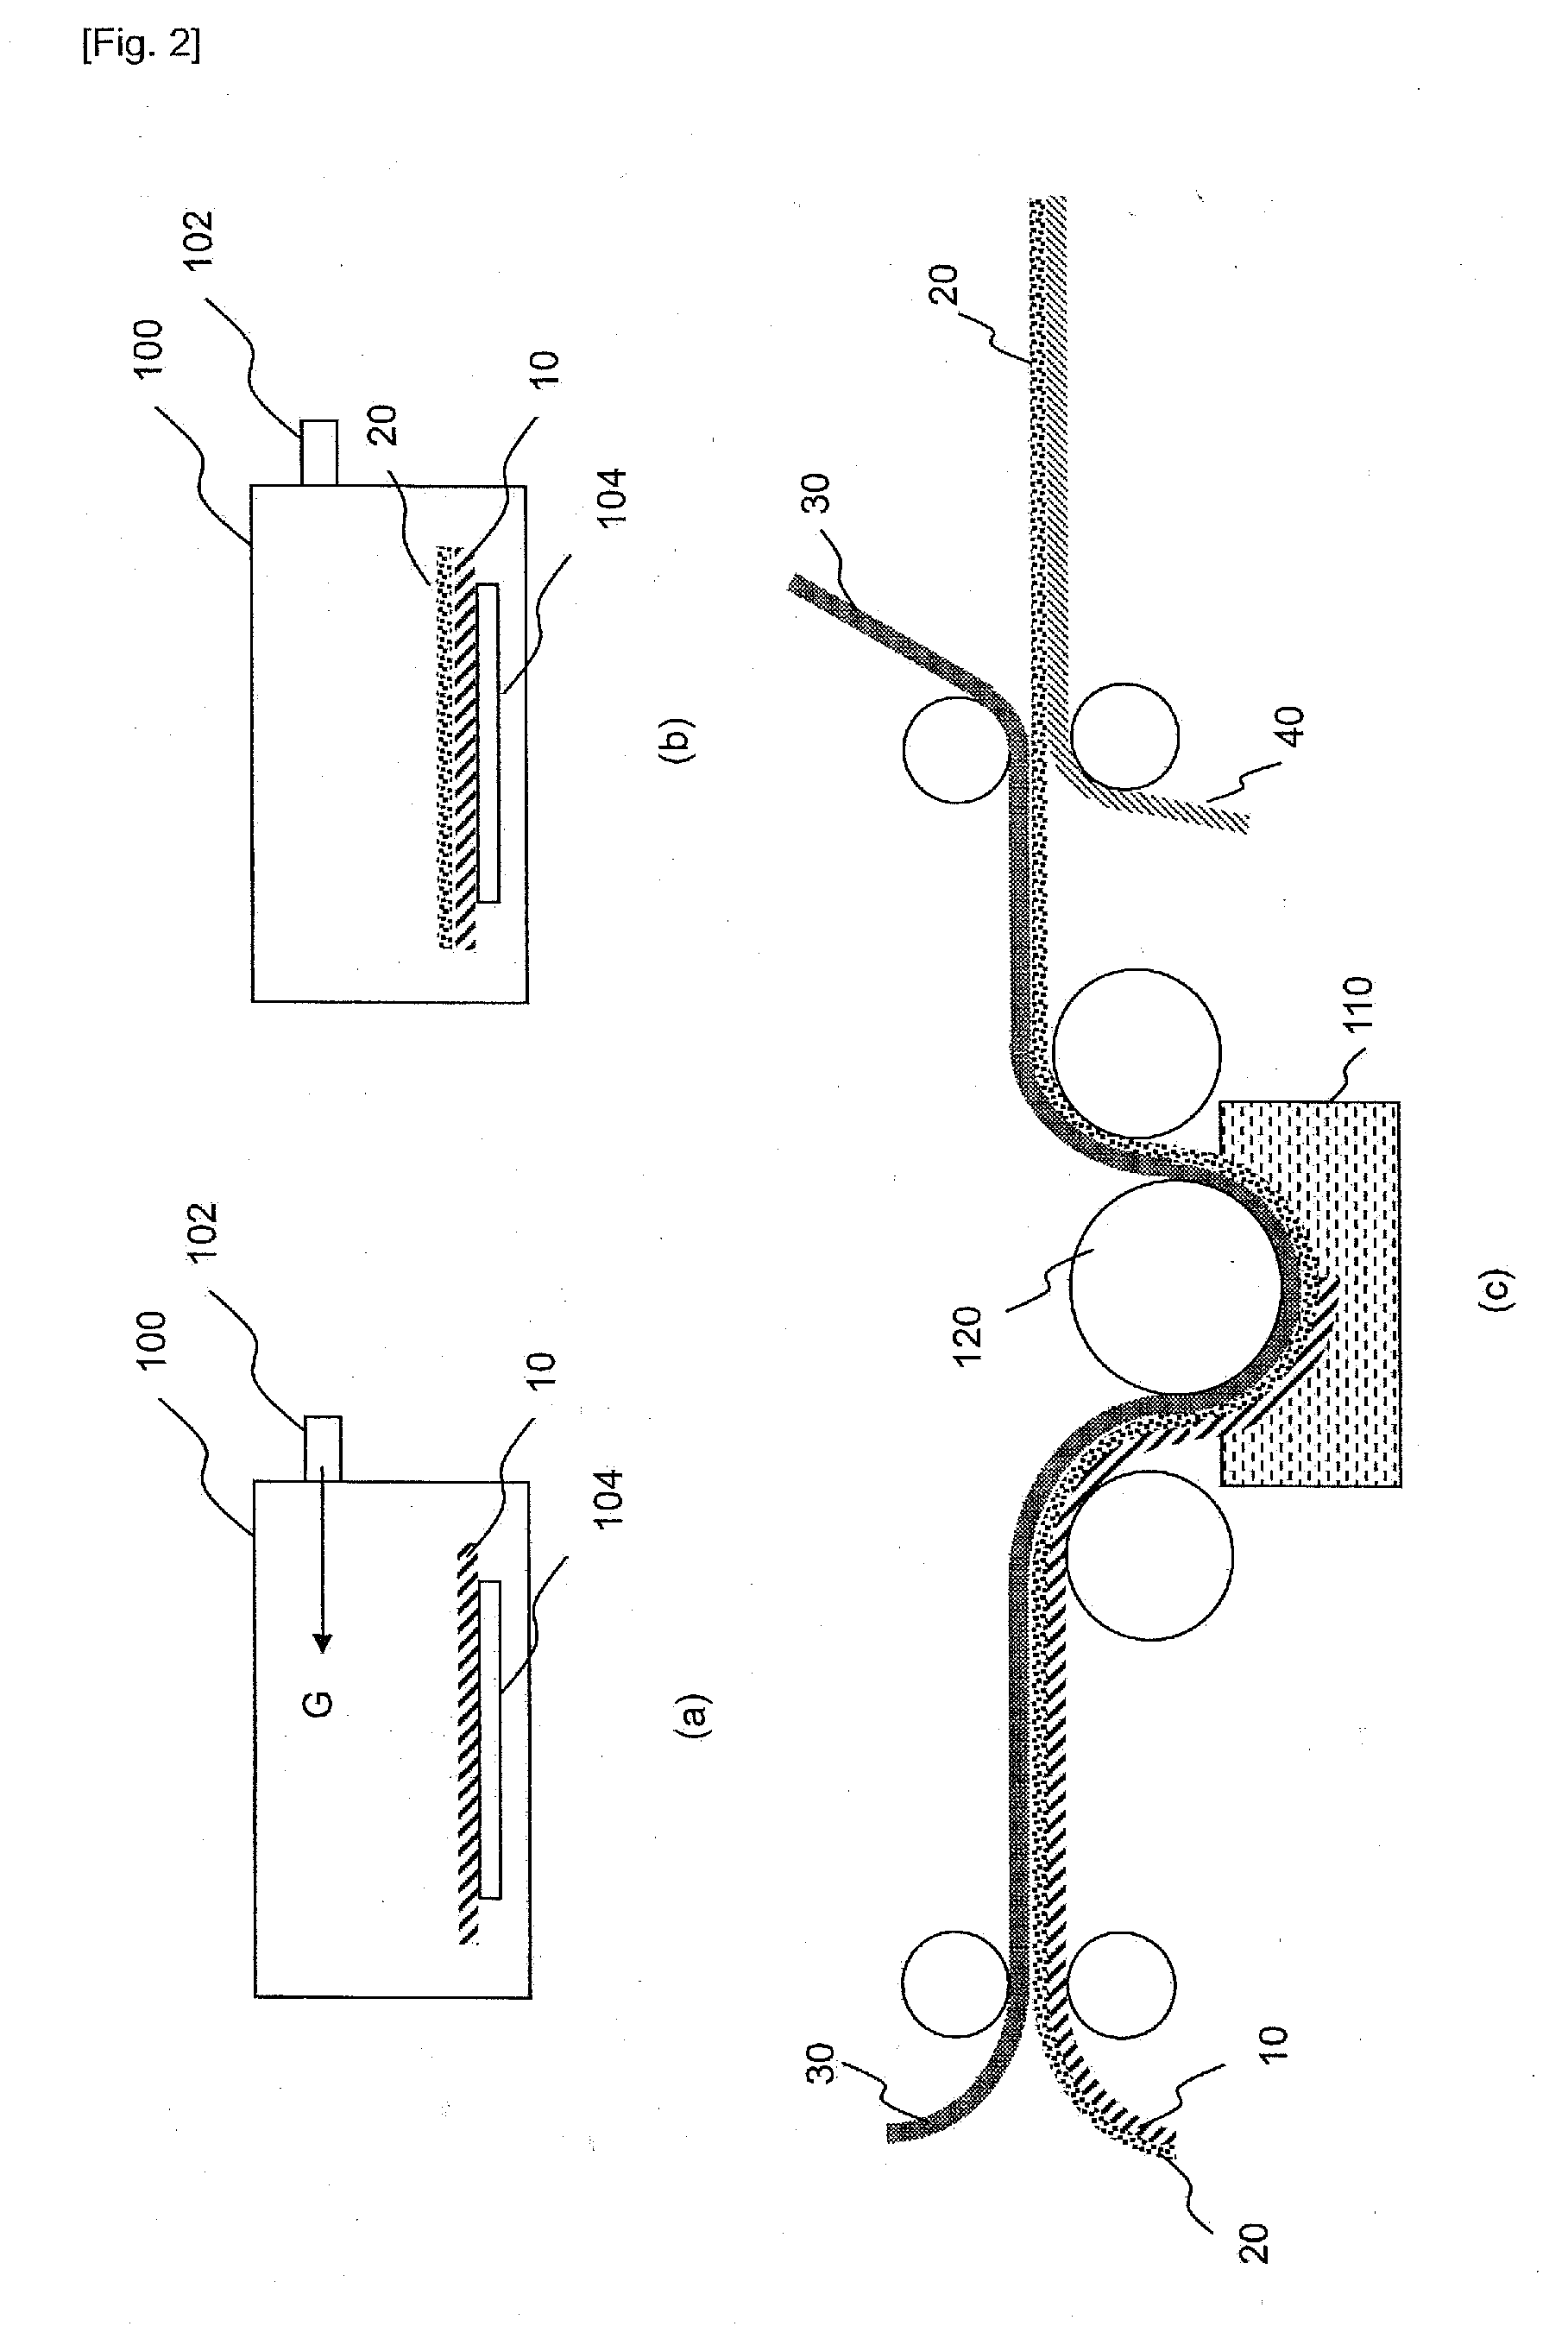 Rolled copper foil for producing graphene and method of producing graphene using the same